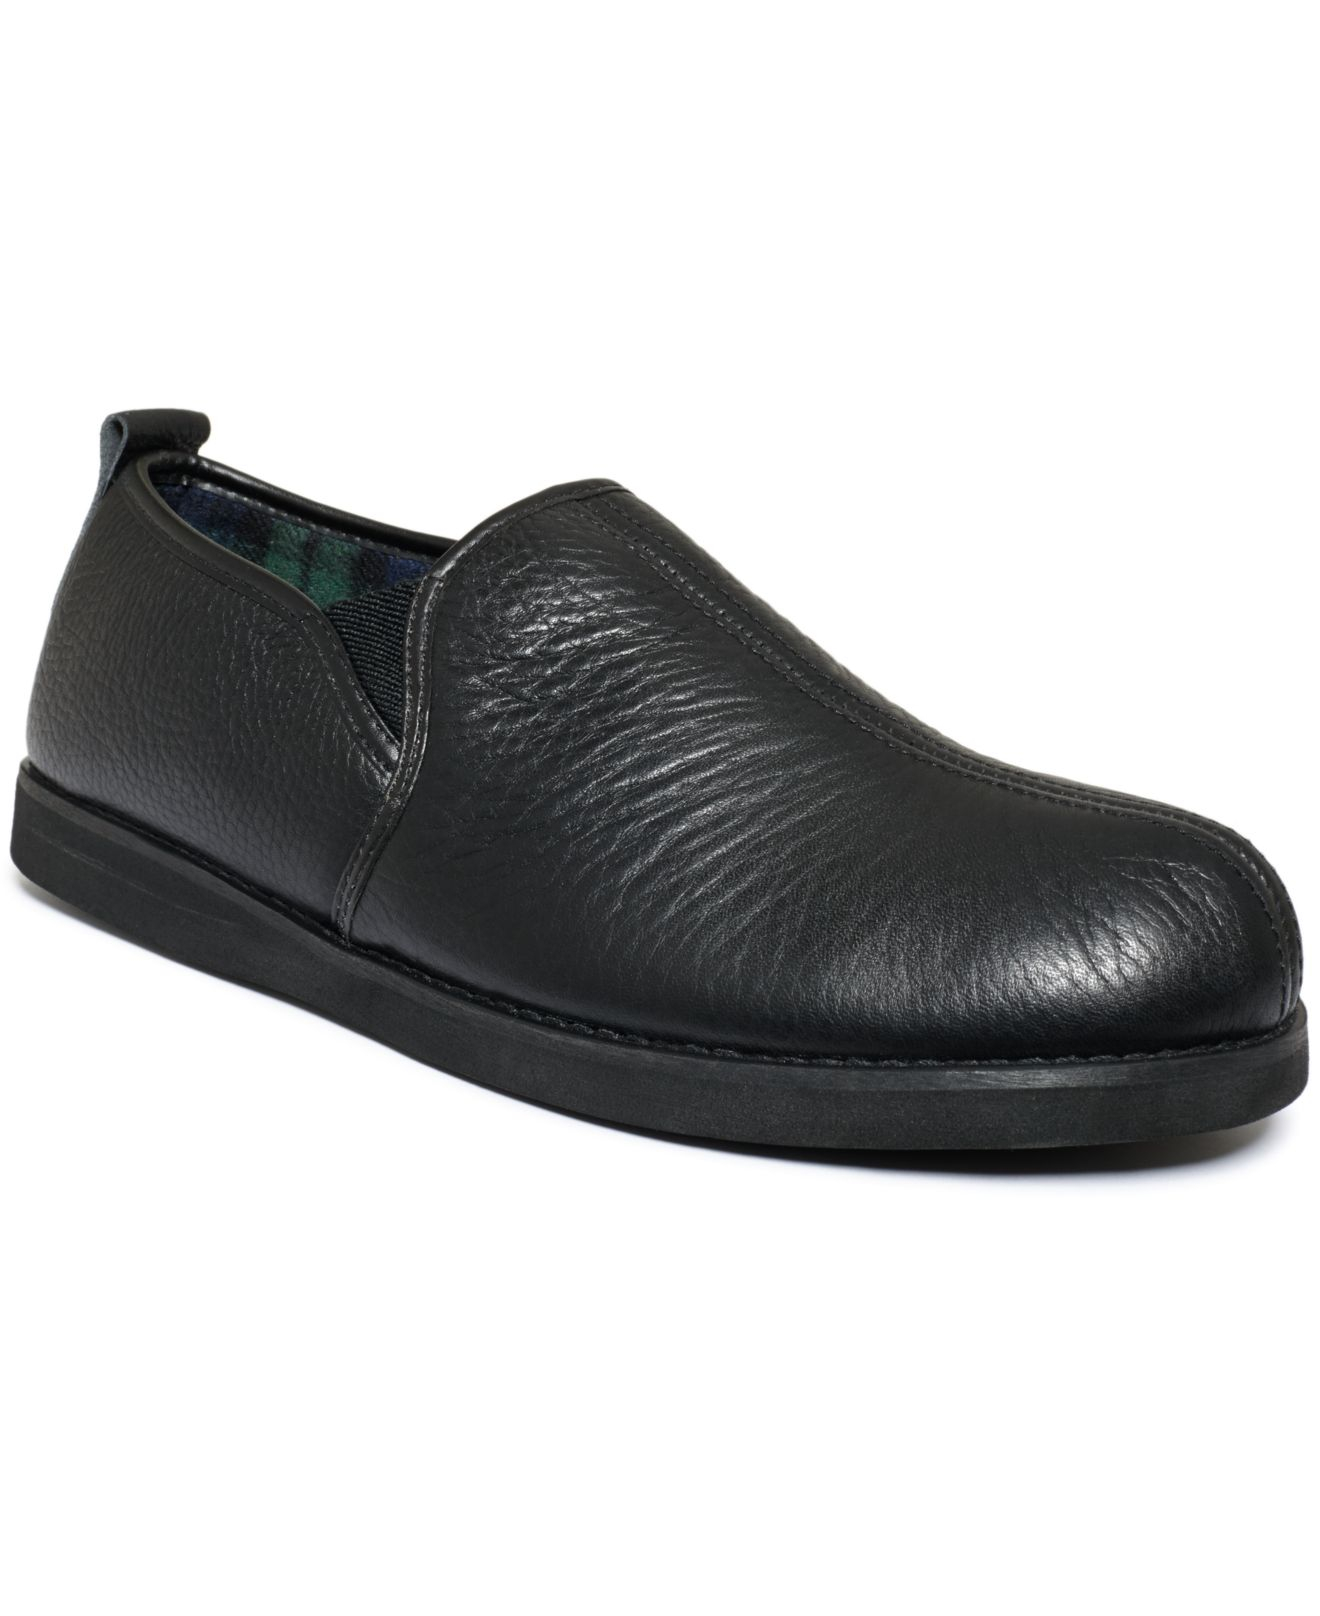 L.B. Evans Admiral Leather Slippers in Black for Men - Lyst